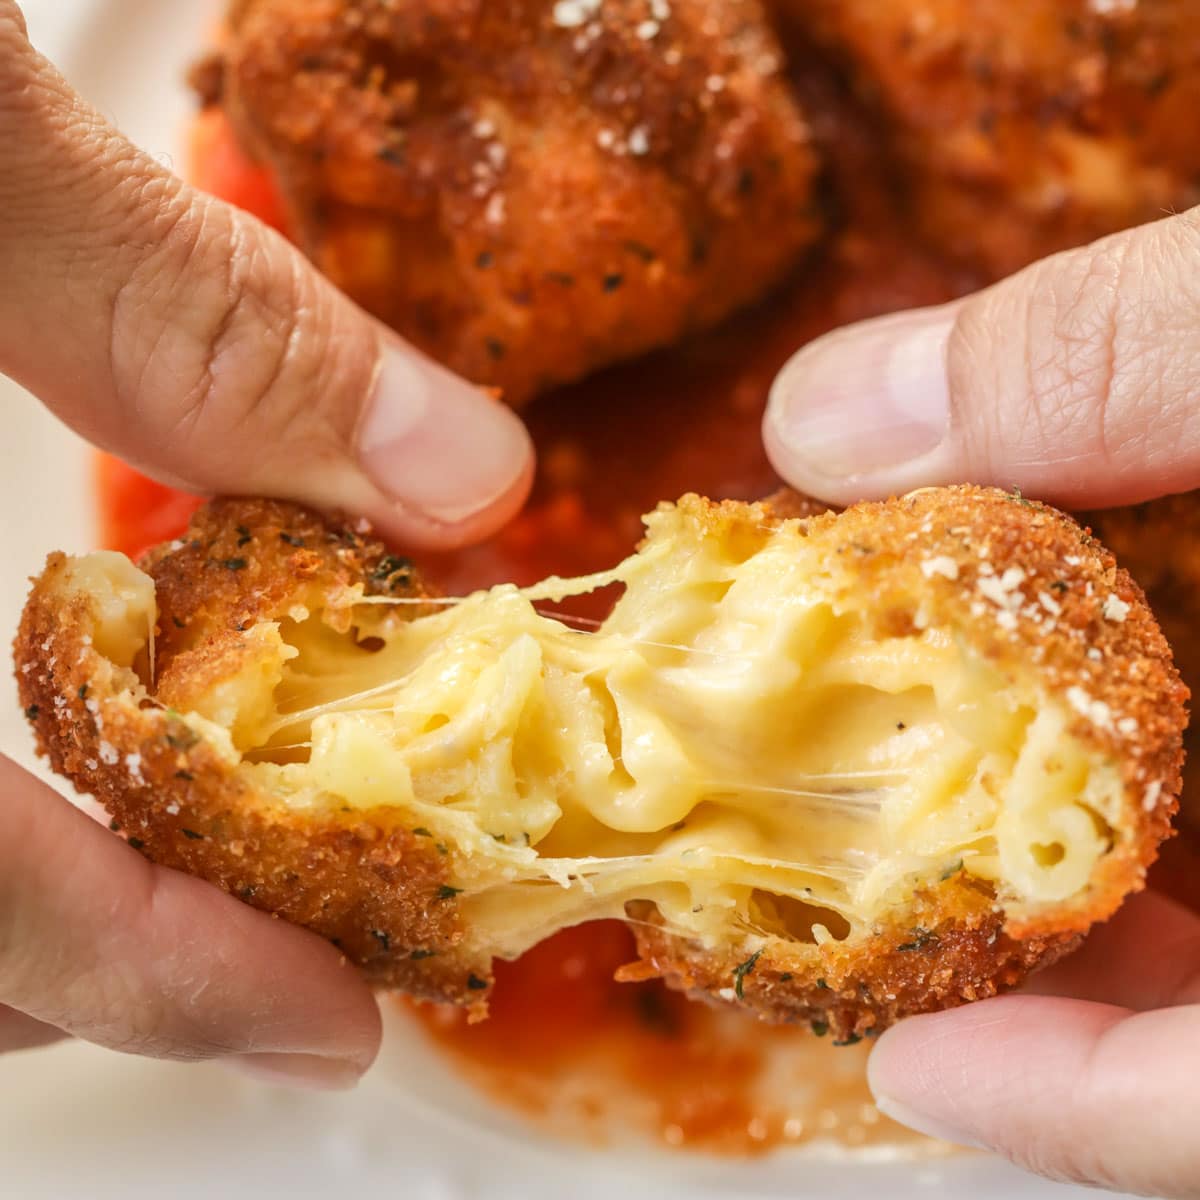 Halloween dinner ideas - pulling apart fried mac and cheese balls.